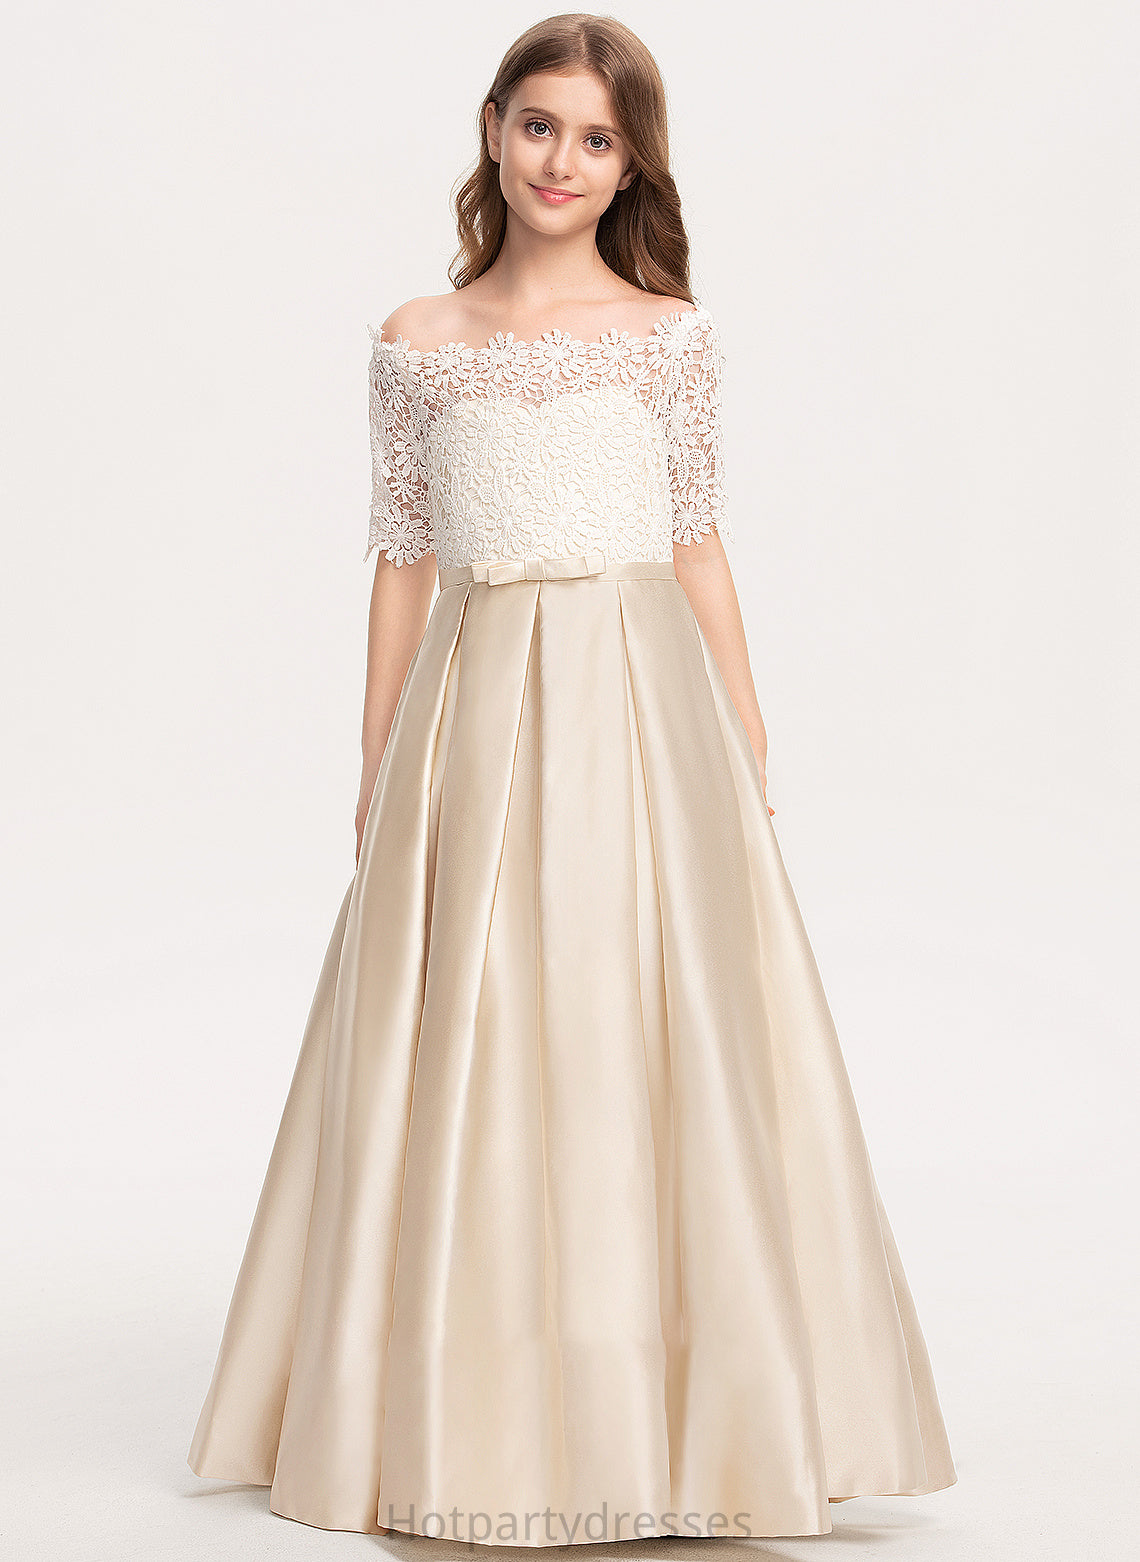 Satin Lace Ball-Gown/Princess Floor-Length Perla Junior Bridesmaid Dresses Pockets With Off-the-Shoulder Bow(s)